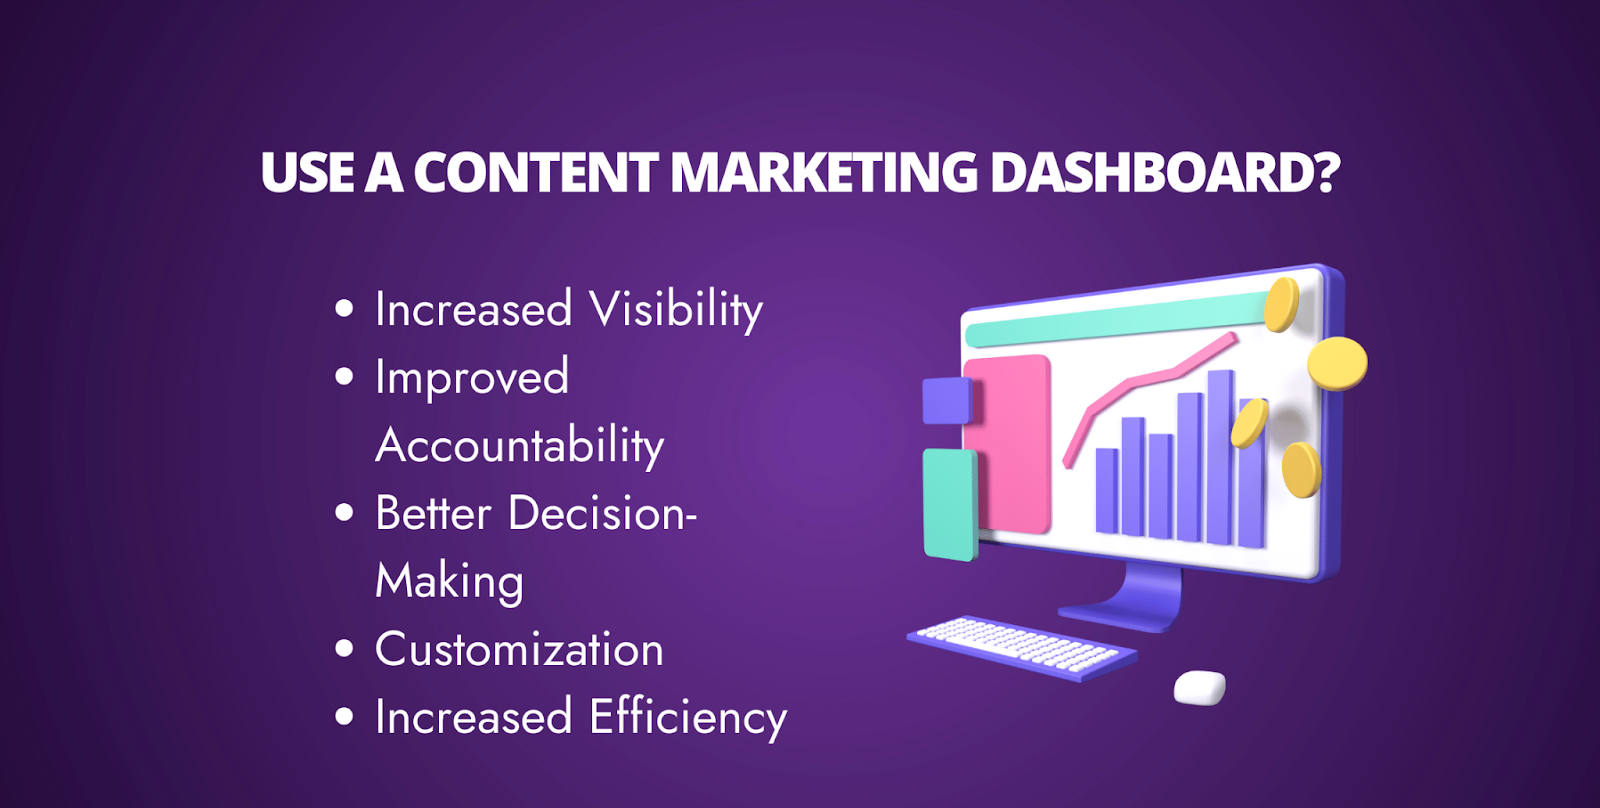 Content Marketing Dashboard Use